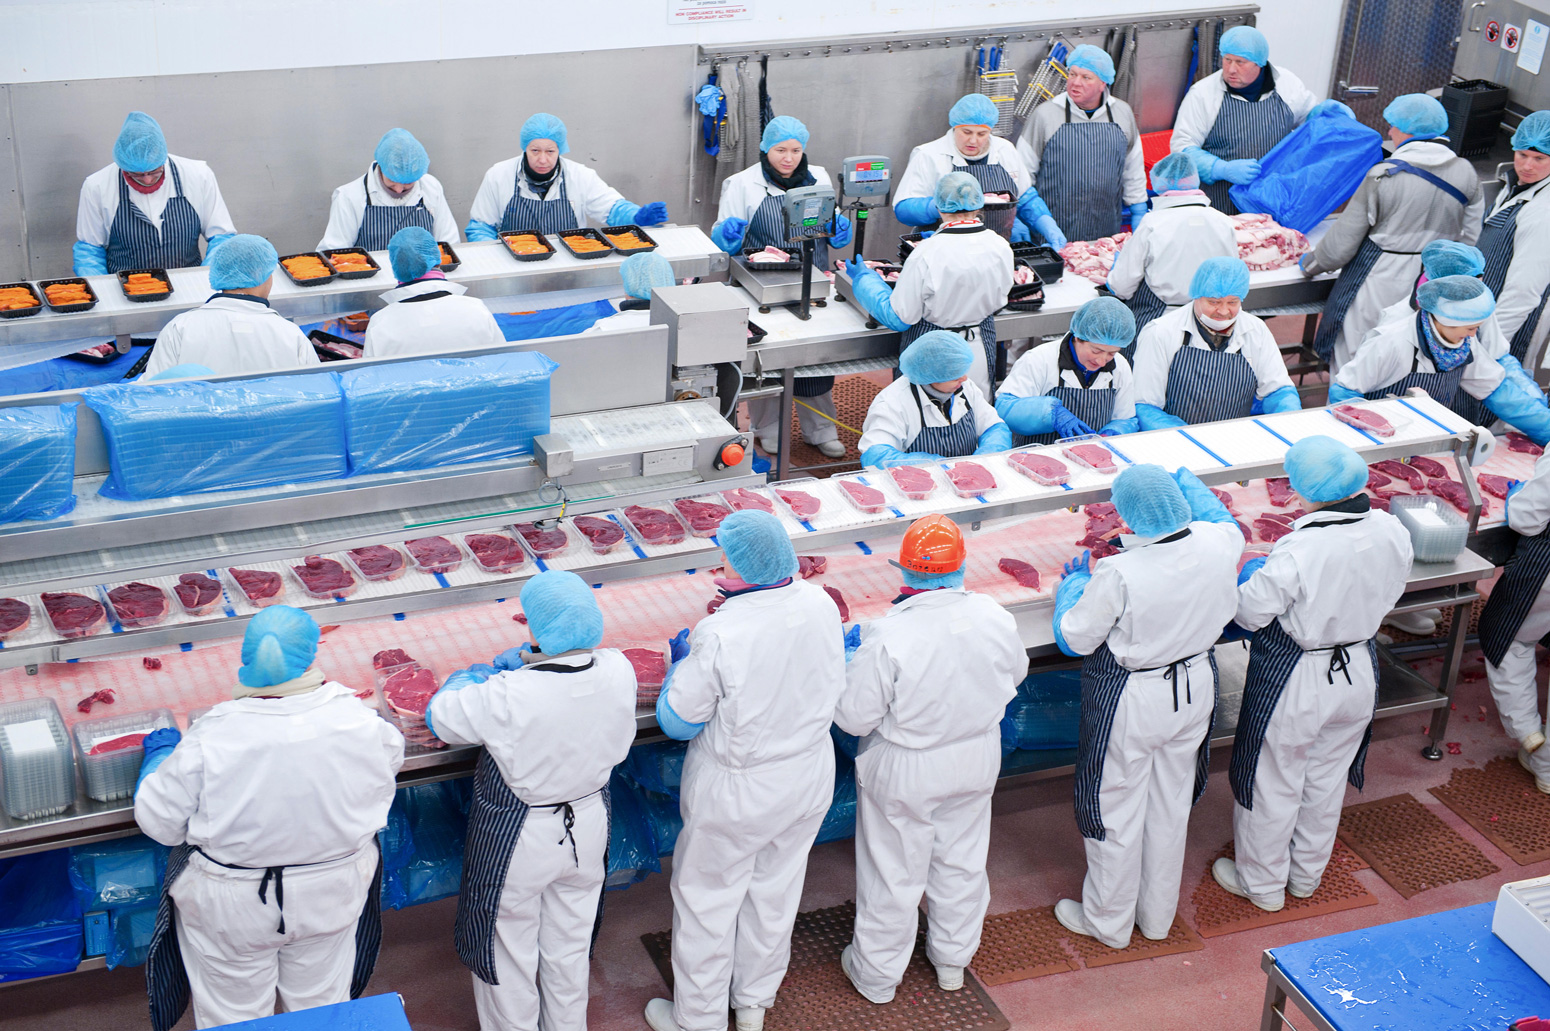 Factory workers on a production line package meat products for the market.